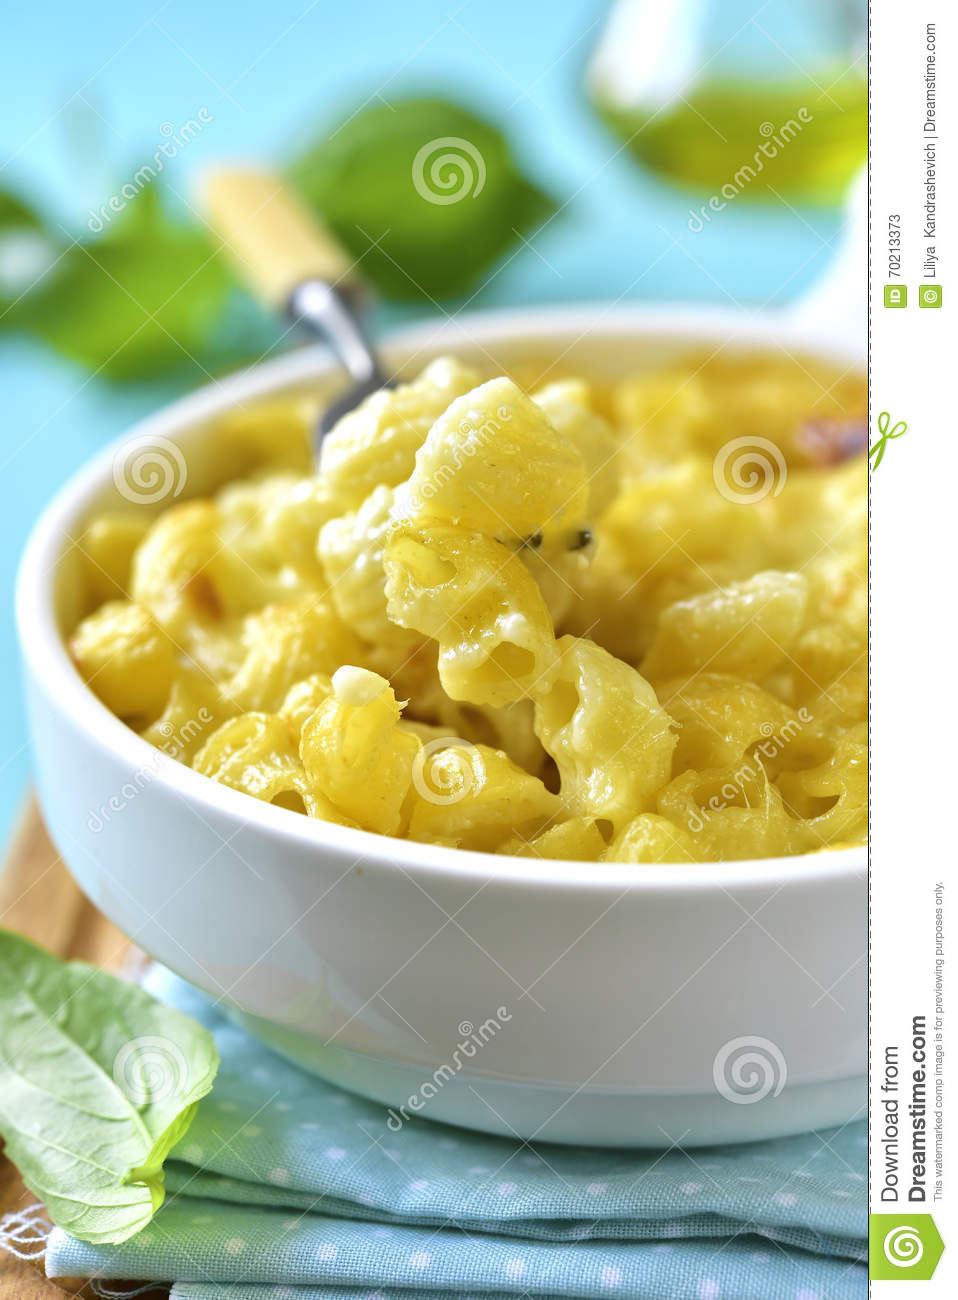 Mac & Cheese 4 The Appetizer Download